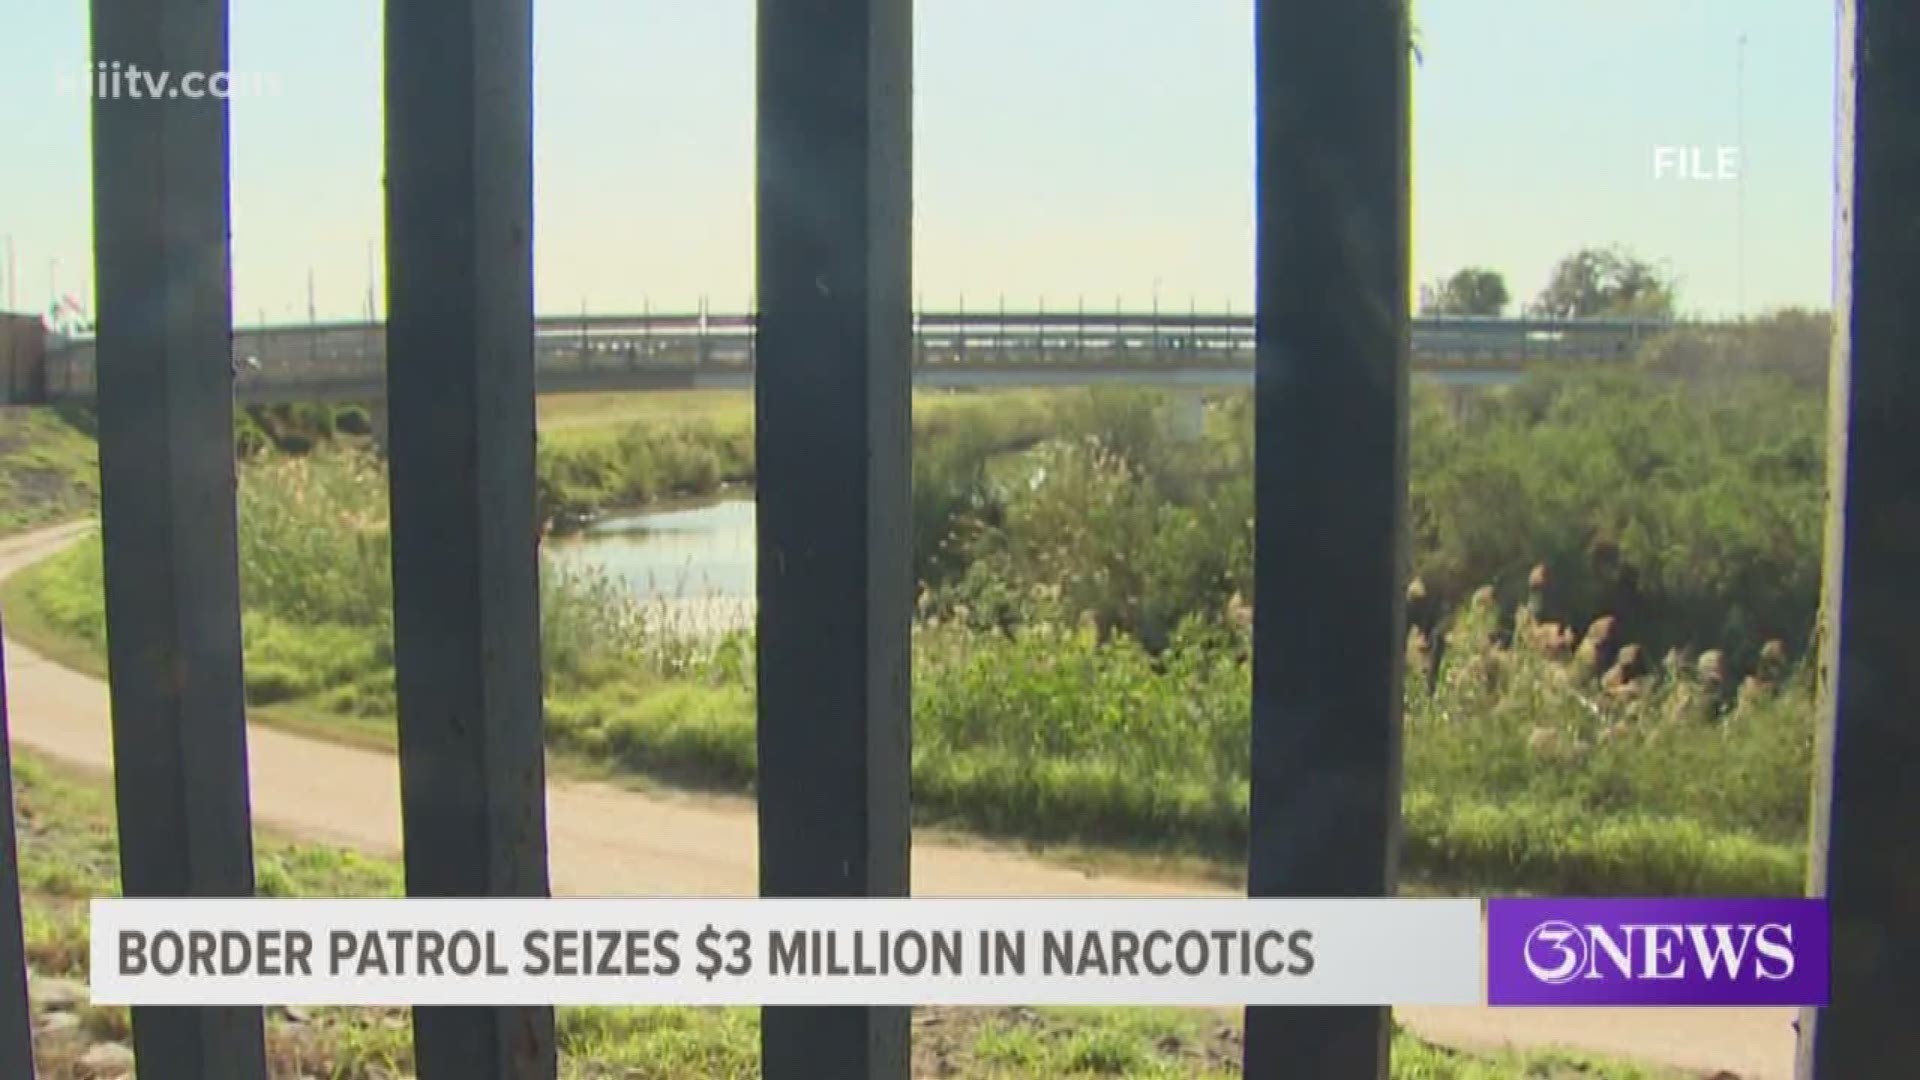 Border Patrol agents at the Rio Grande Valley sector seized millions of dollars worth of narcotics in less than 48 hours.